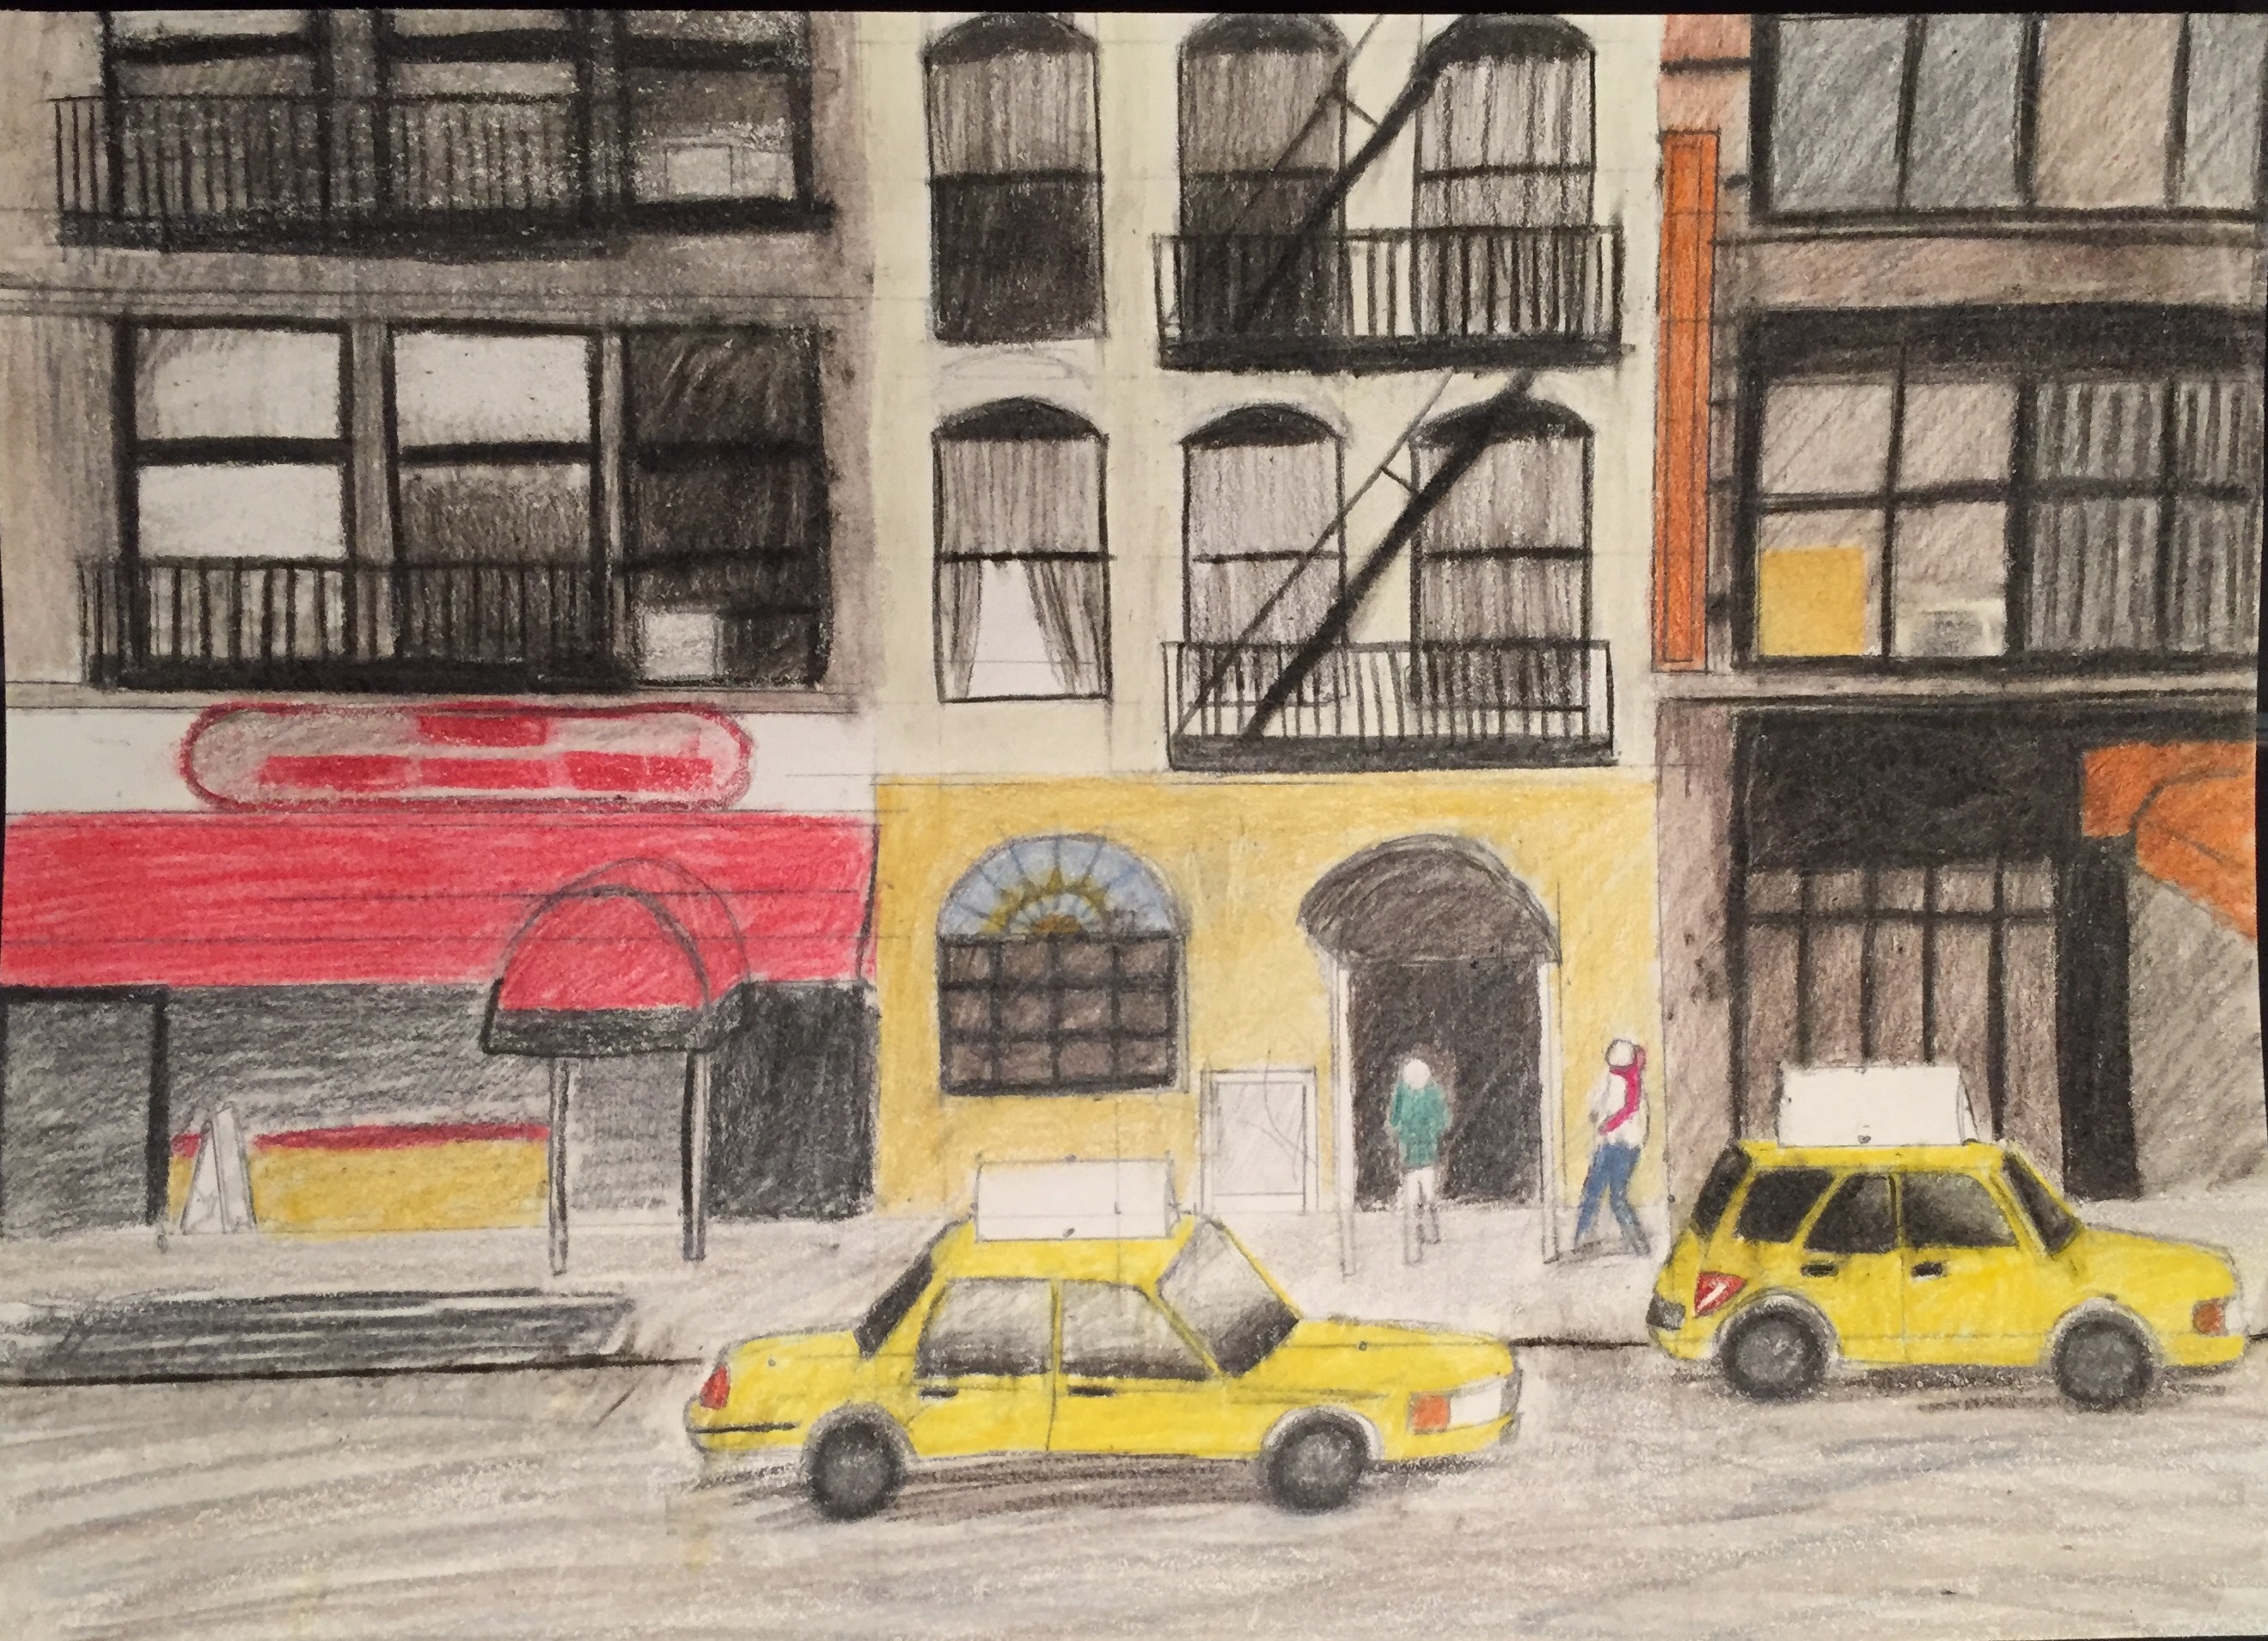 View Image Details Sophie - NYC Street Scene